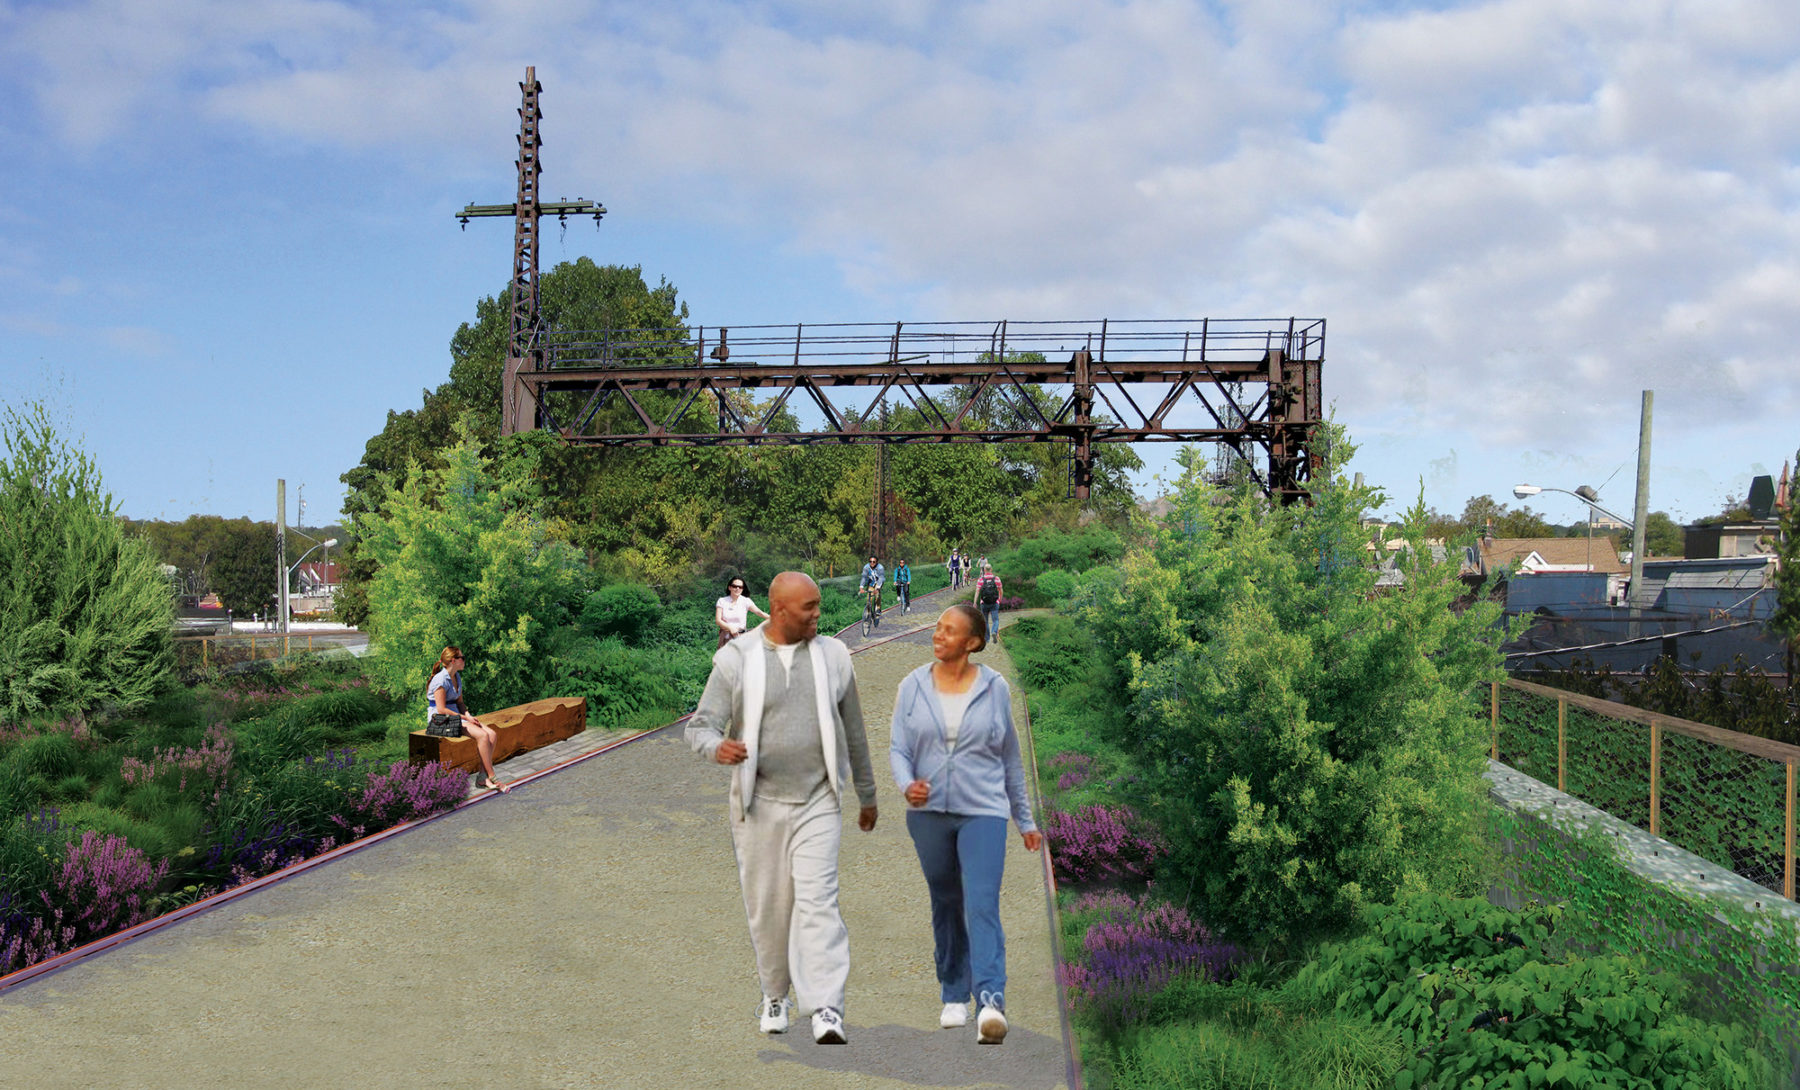 rendering of site two people walk on path